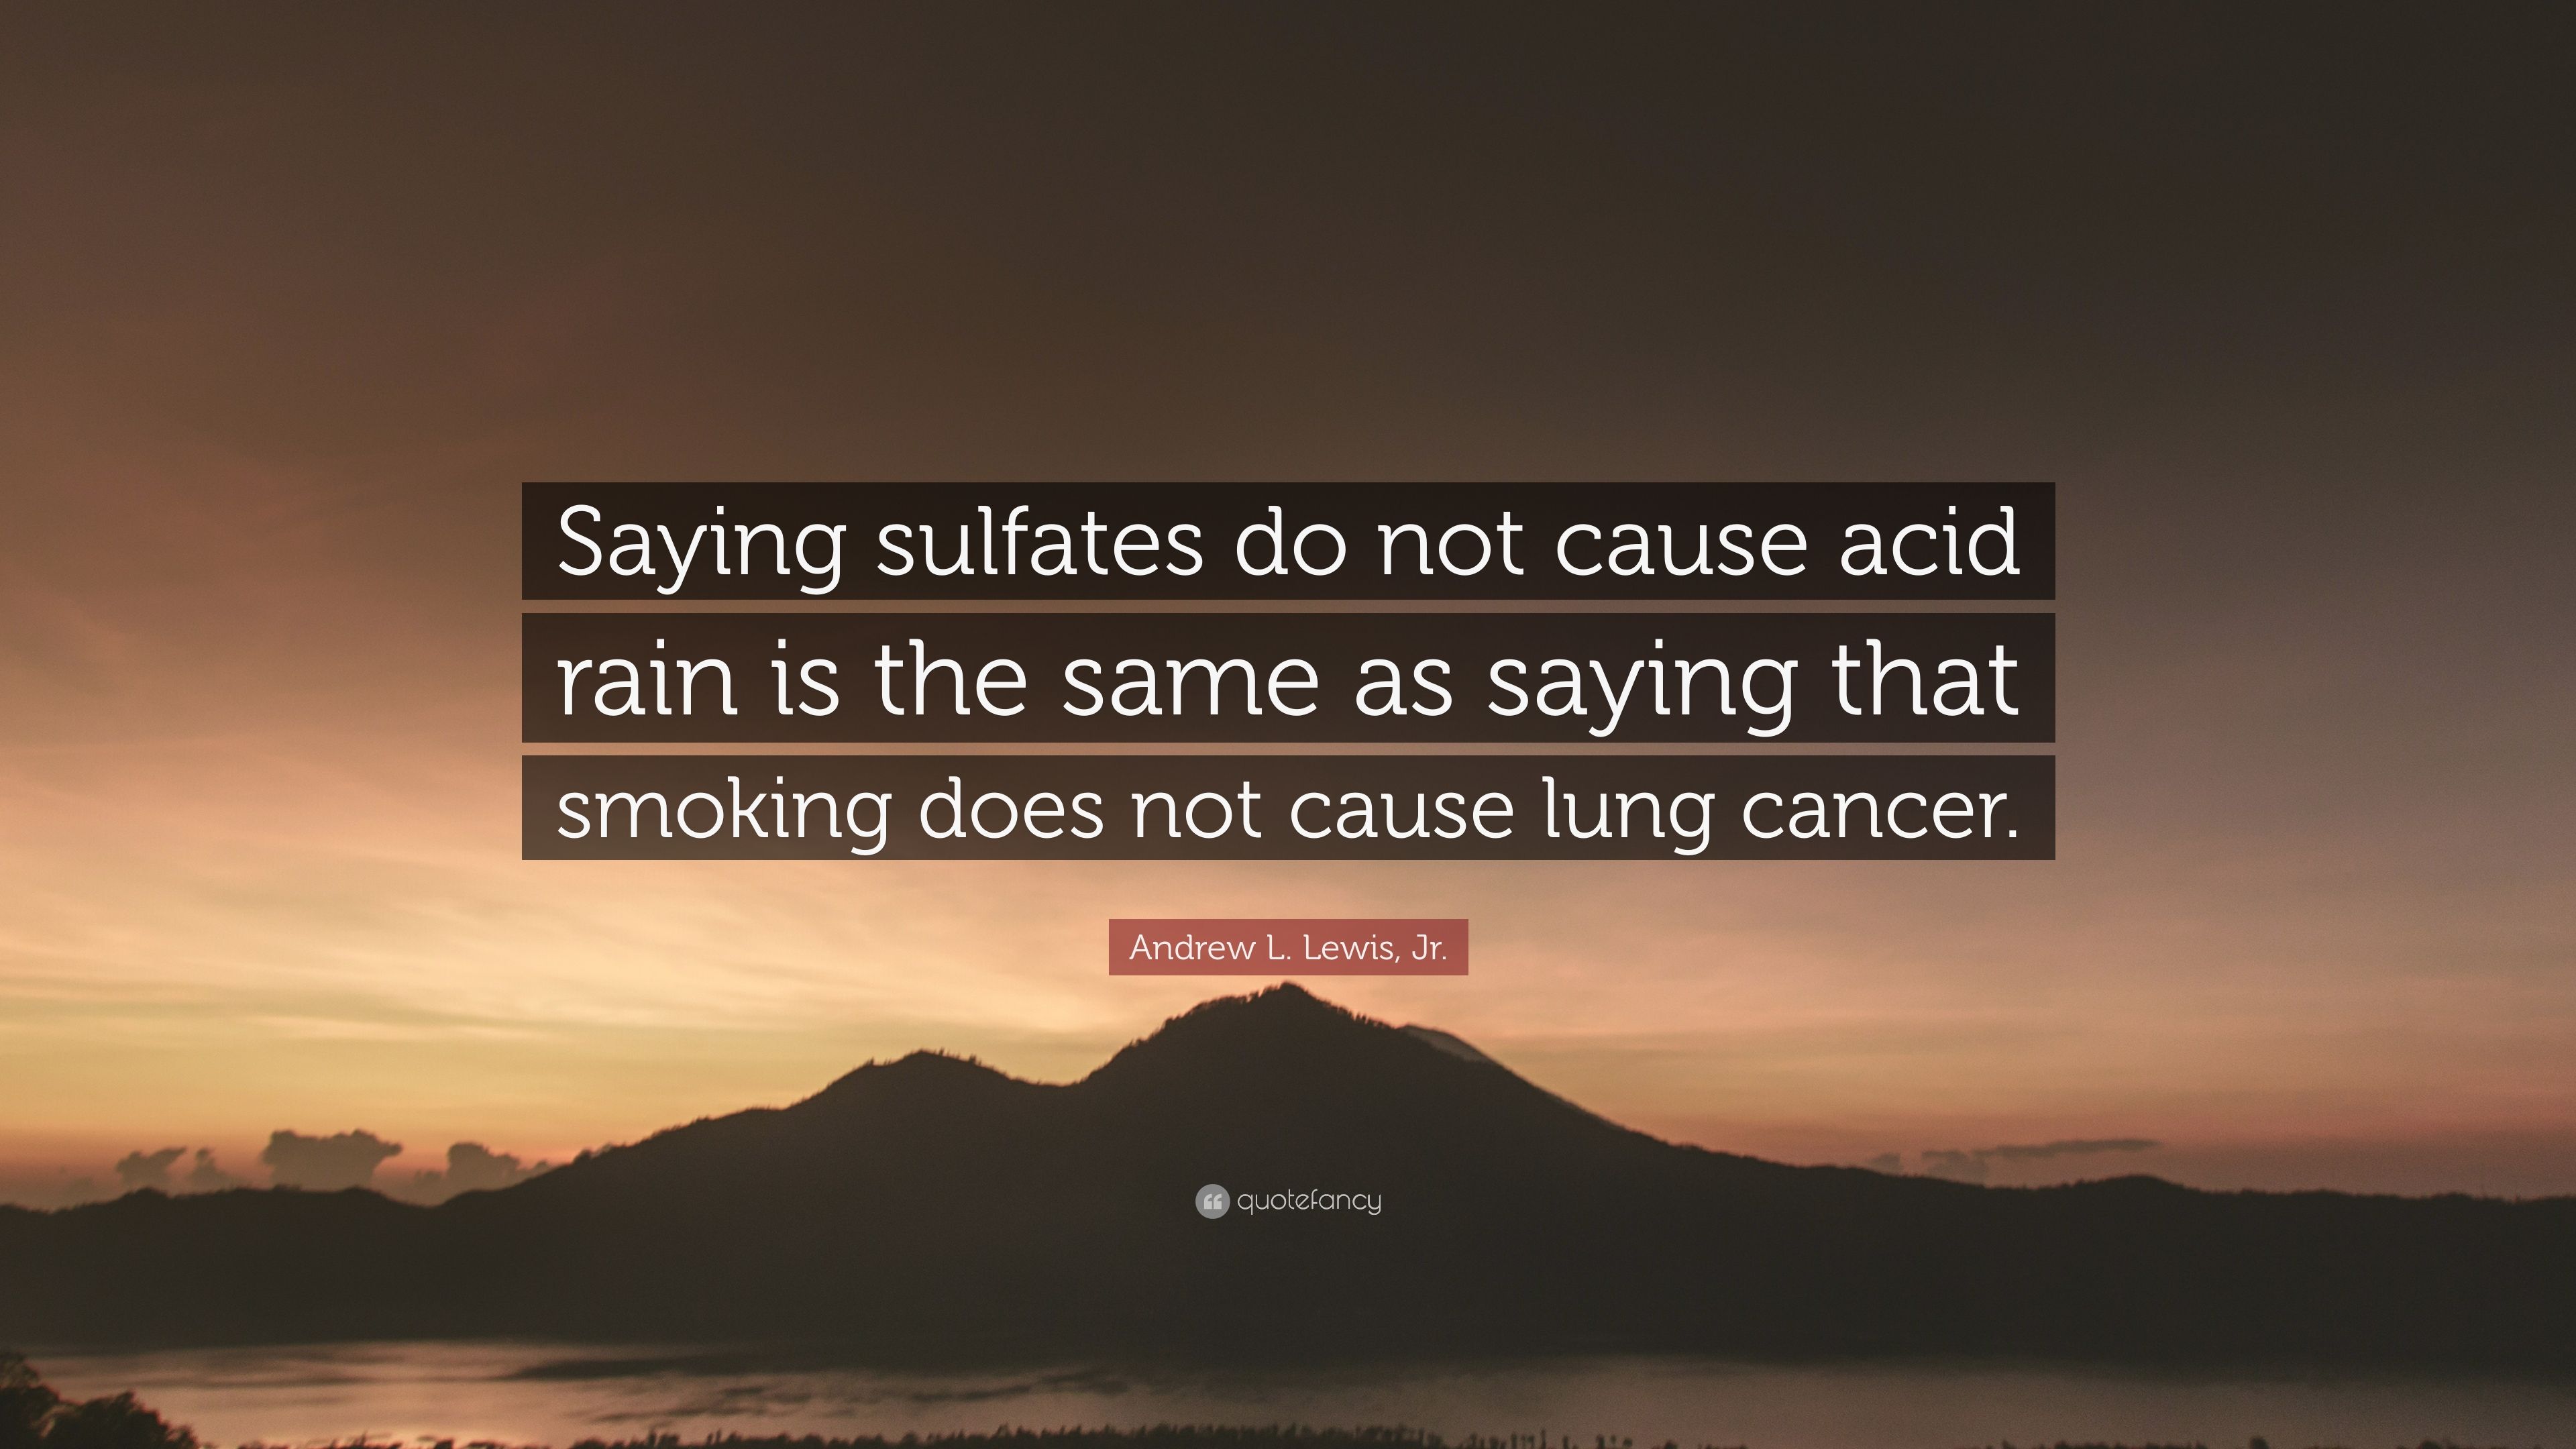 Andrew L. Lewis, Jr. Quote: “Saying sulfates do not cause acid rain is the same as saying that smoking does not cause lung cancer.” (7 wallpaper)